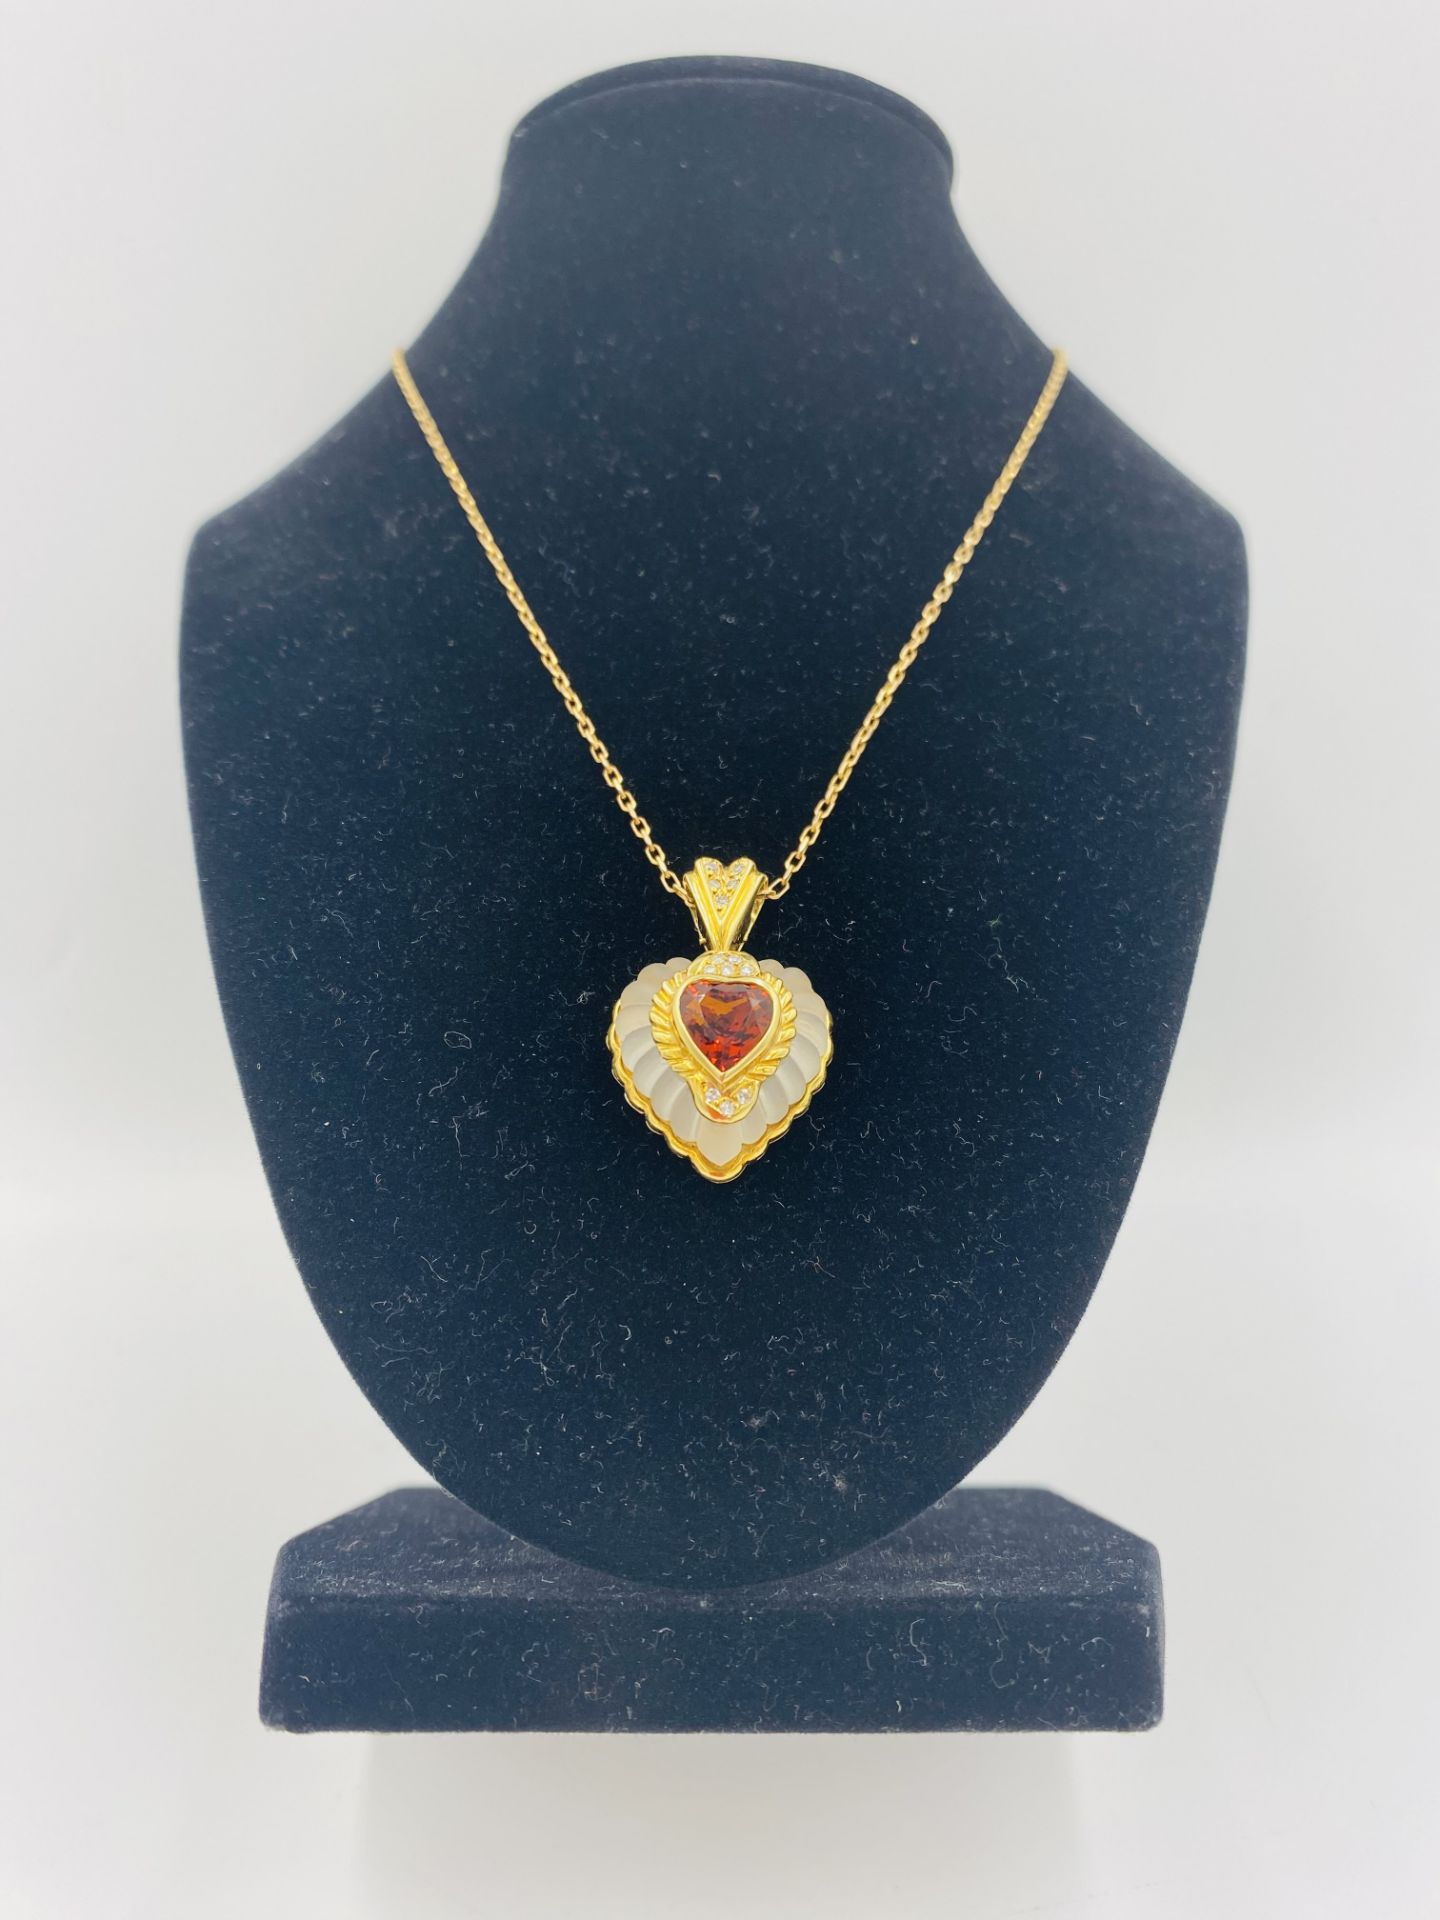 Rock crystal heart shaped pendant with 18ct gold mount